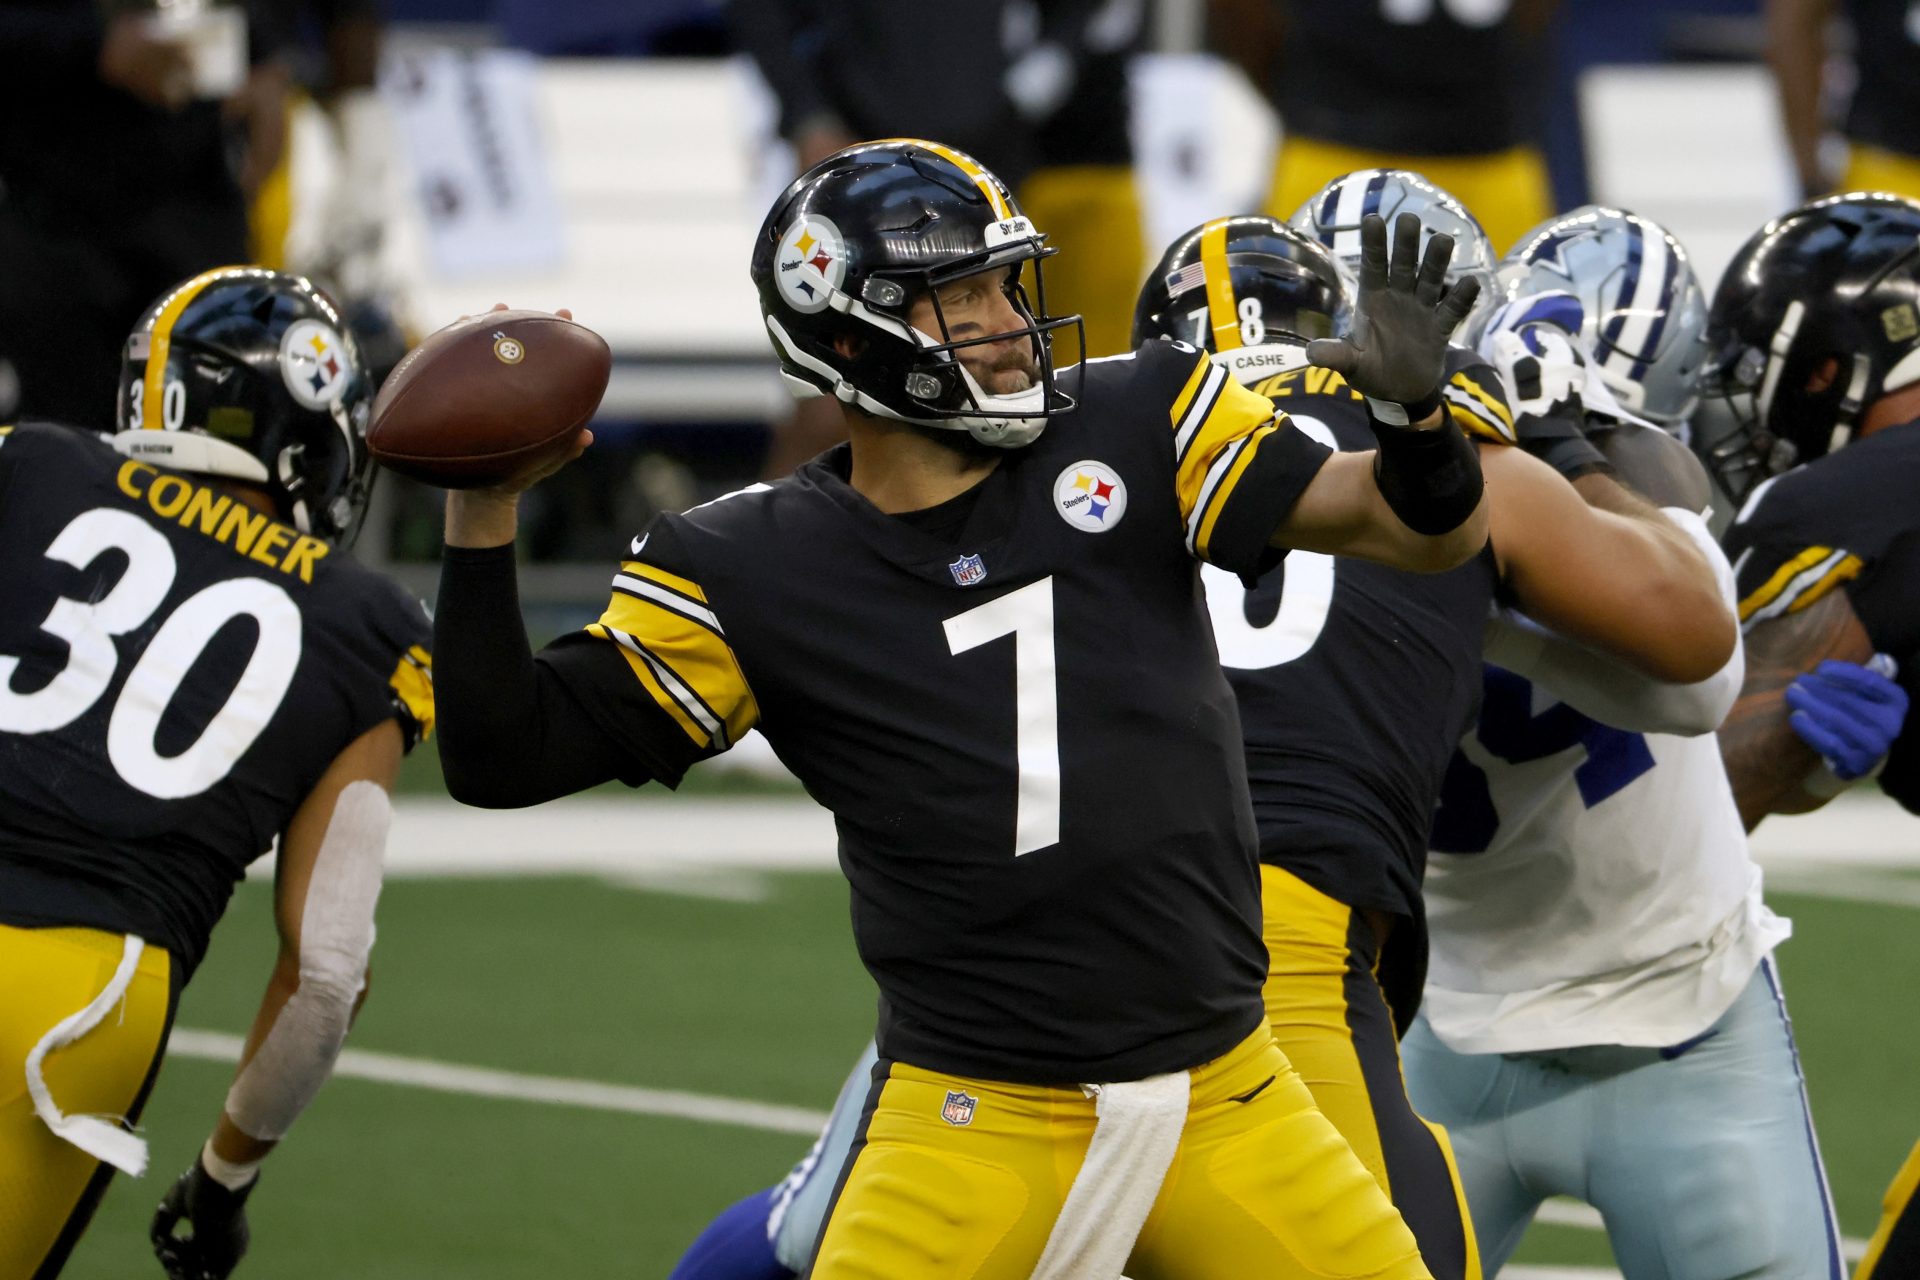 Pittsburgh Steelers quarterback Ben Roethlisberger (7) throws a pass in the first half of an NFL football game against the Dallas Cowboys in Arlington, Texas, Sunday, Nov. 8, 2020.